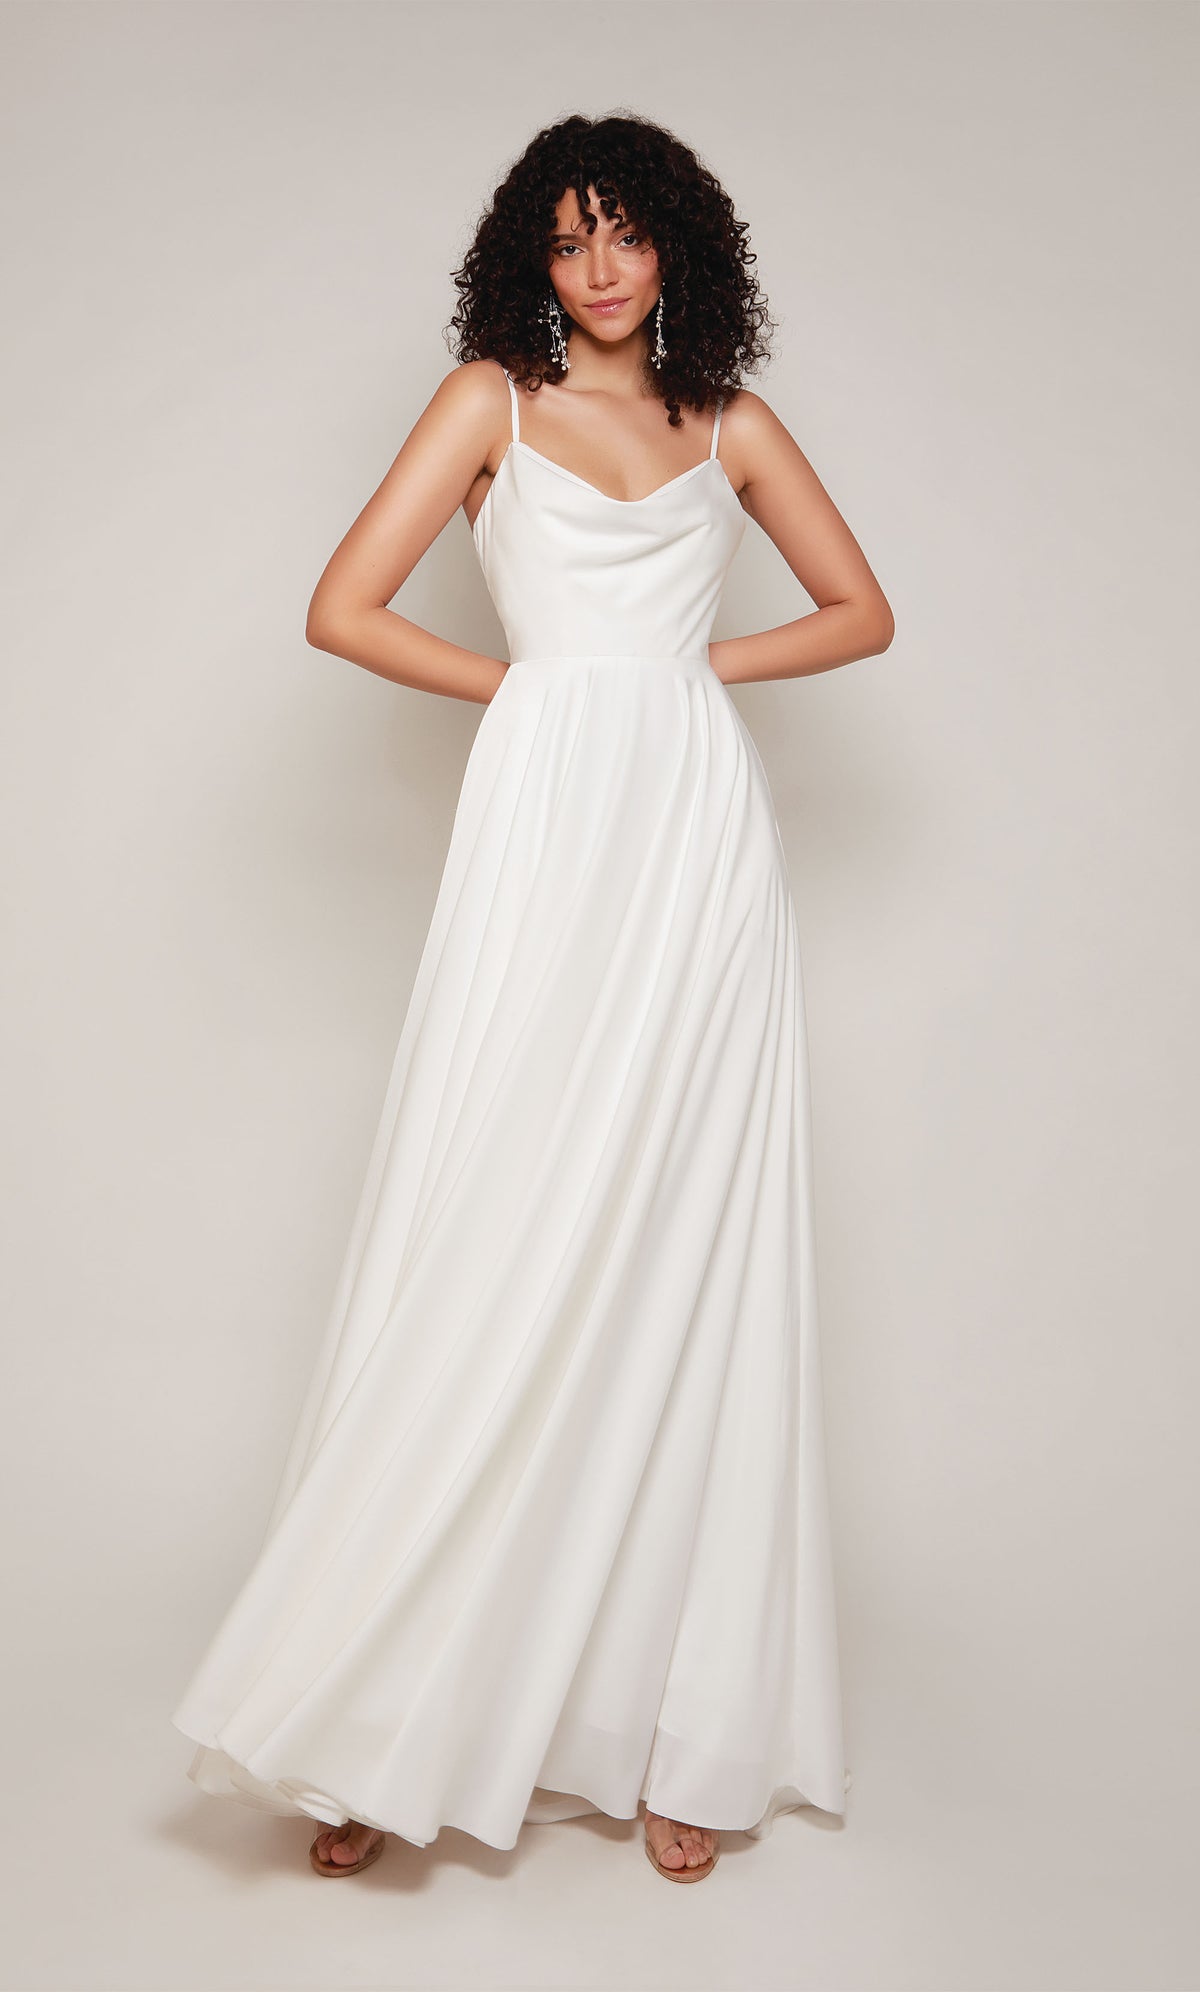 A simple wedding dress in white satin with an A-line skirt, V-shaped cowl neckline, and adjustable spaghetti straps.